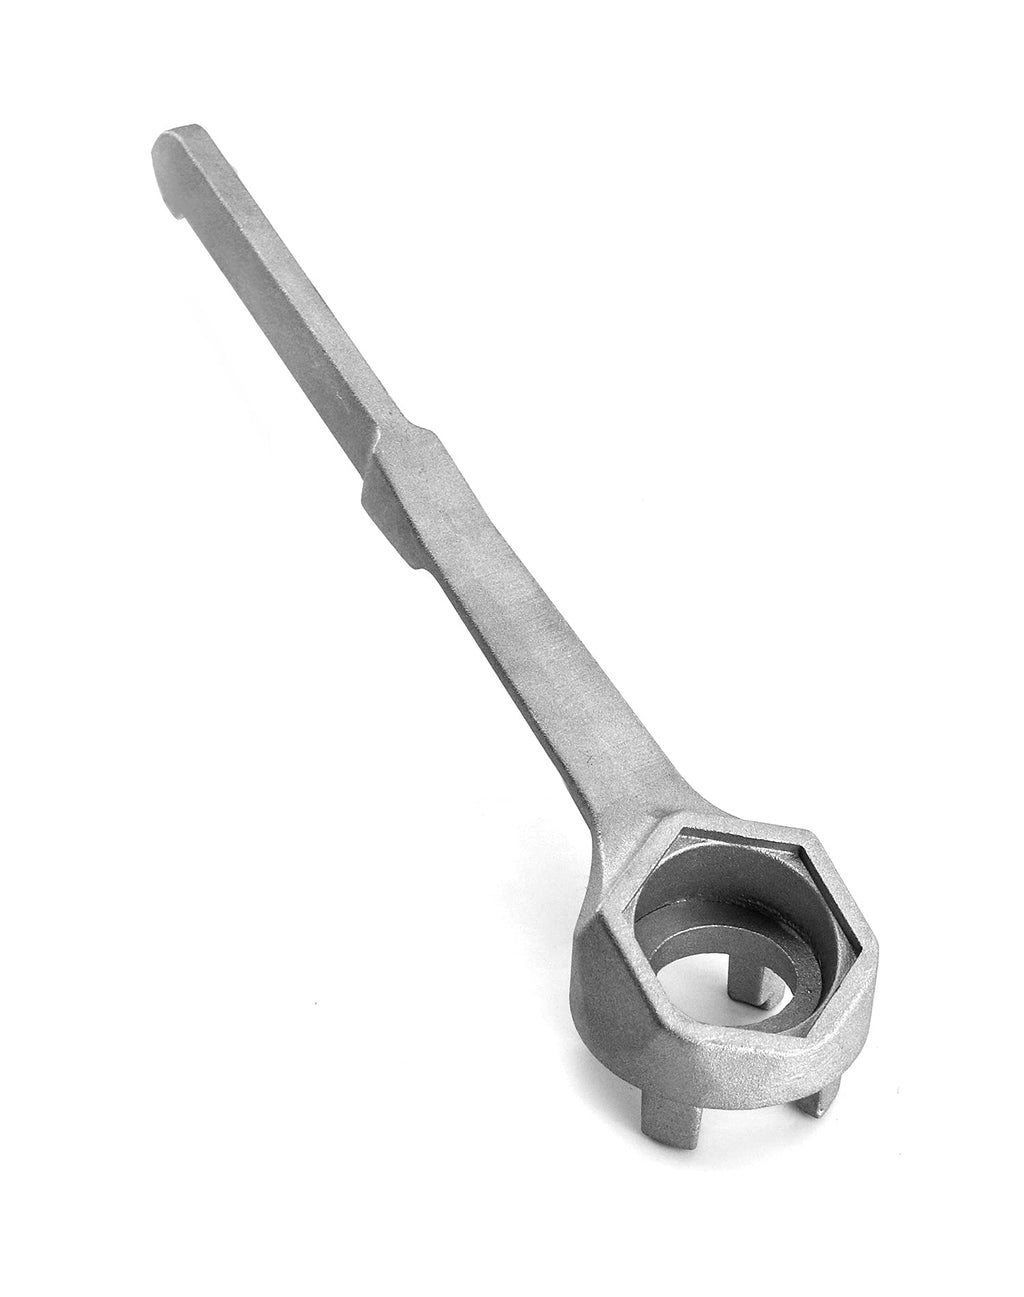  [AUSTRALIA] - QWORK Drum Wrench, Aluminum Wrench Opener for 10 15 20 30 55 Gallon Barrels, 2" and 3/4" Bung Cap 1 pack